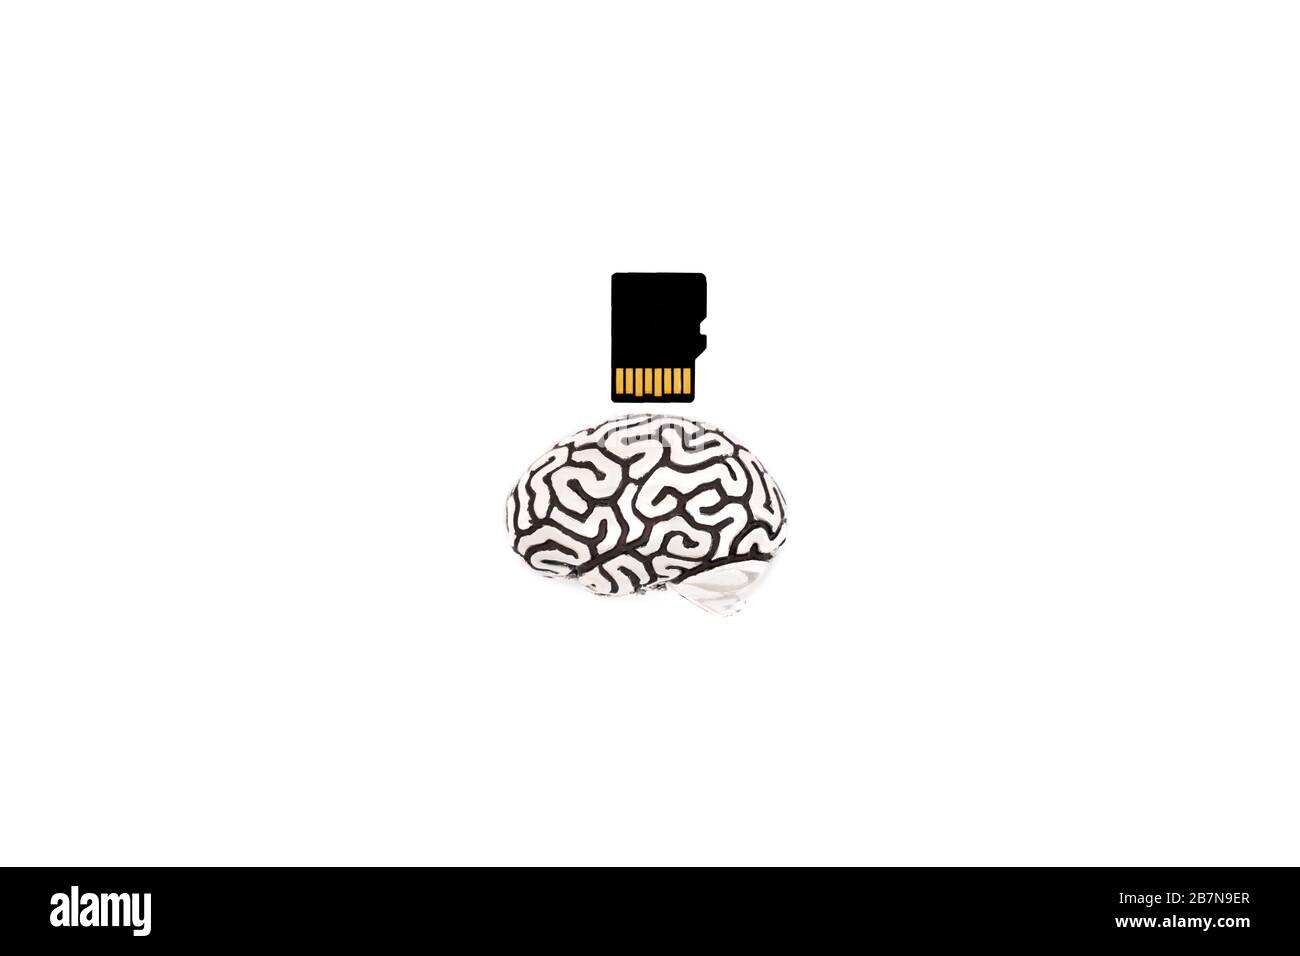 Small metal model of a human brain close to a micro SD card isolated on white. Profile shot. Human brain memory capacity increase concept. Stock Photo